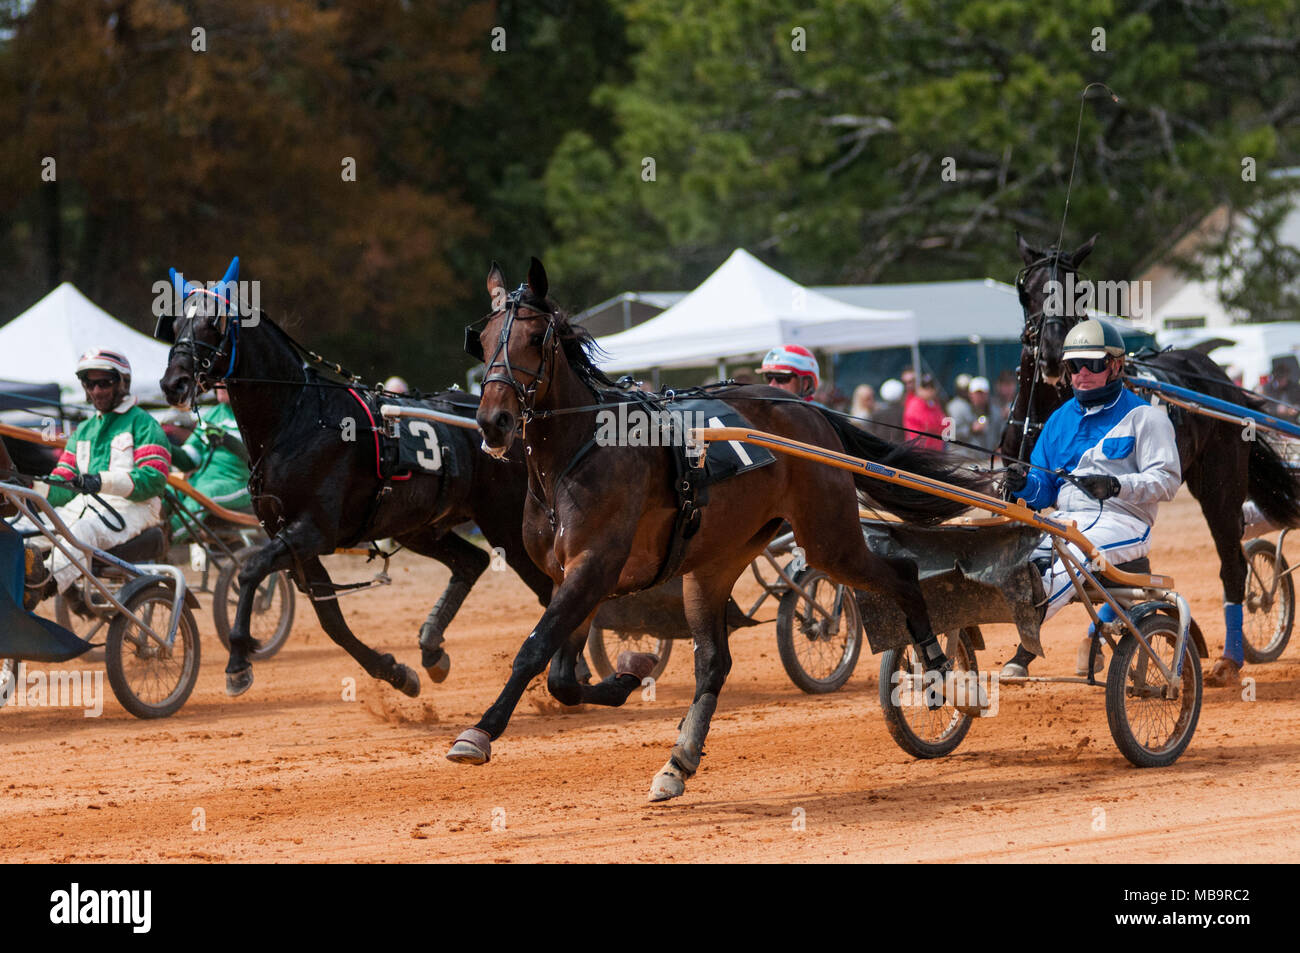 Pinehurst, North Carolina, USA. 8th Apr, 2018. April 8, 2018 - Pinehurst, N.C., USA - Bride (1) and driver, Douglas R. Ackerman, and Kolin (3) and driver, David Wade, close in on the starting gate in the fifth race at the 69th annual Spring Matinee Harness races sponsored by the Pinehurst Driving & Training Club, at the Pinehurst Harness Track, Pinehurst, N.C. The Pinehurst Harness Track is a 111-acre equestrian facility that has been a winter training center for standardbred horses since 1915. This year's races commemorate the 103rd anniversary of the track. (Credit Image: © Timothy L. Hale Stock Photo